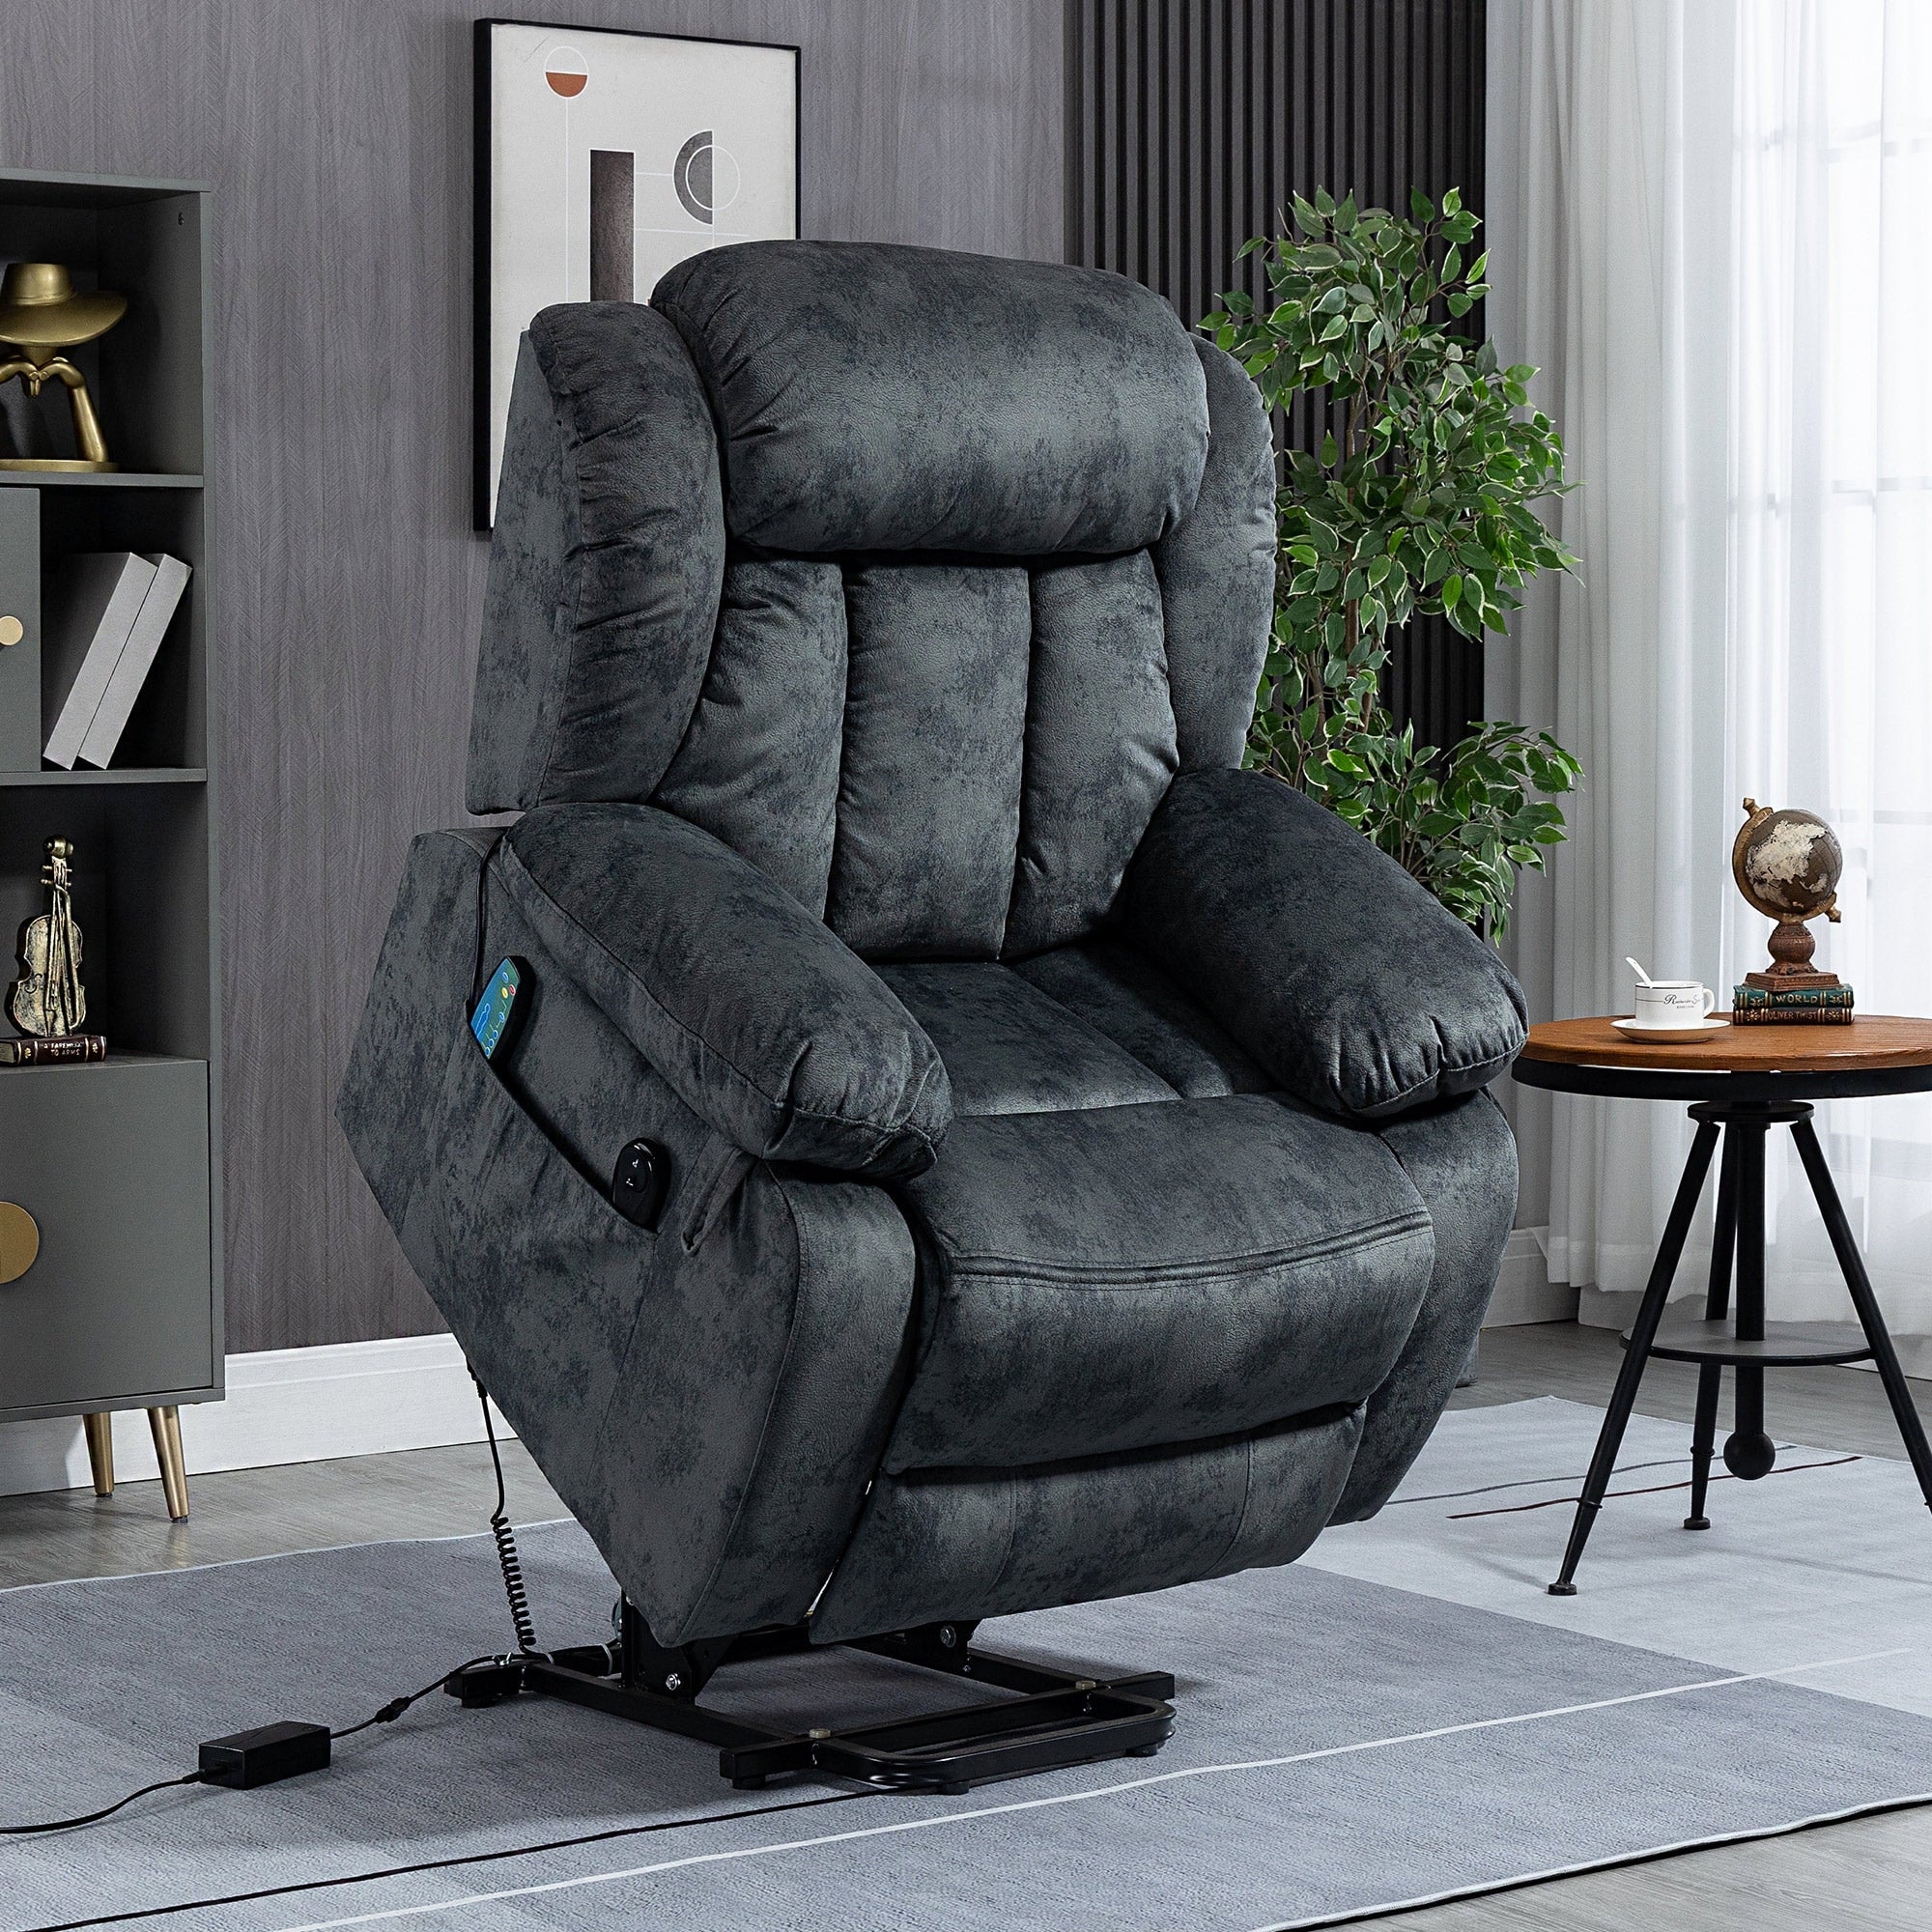 https://ak1.ostkcdn.com/images/products/is/images/direct/4b3b6904144303d00bf370088f5cea8186b5be94/Soft-Multifunctional-Power-Lift-Heated-Recliner-Single-Sofa-Chair-with-Vibration-Massage.jpg